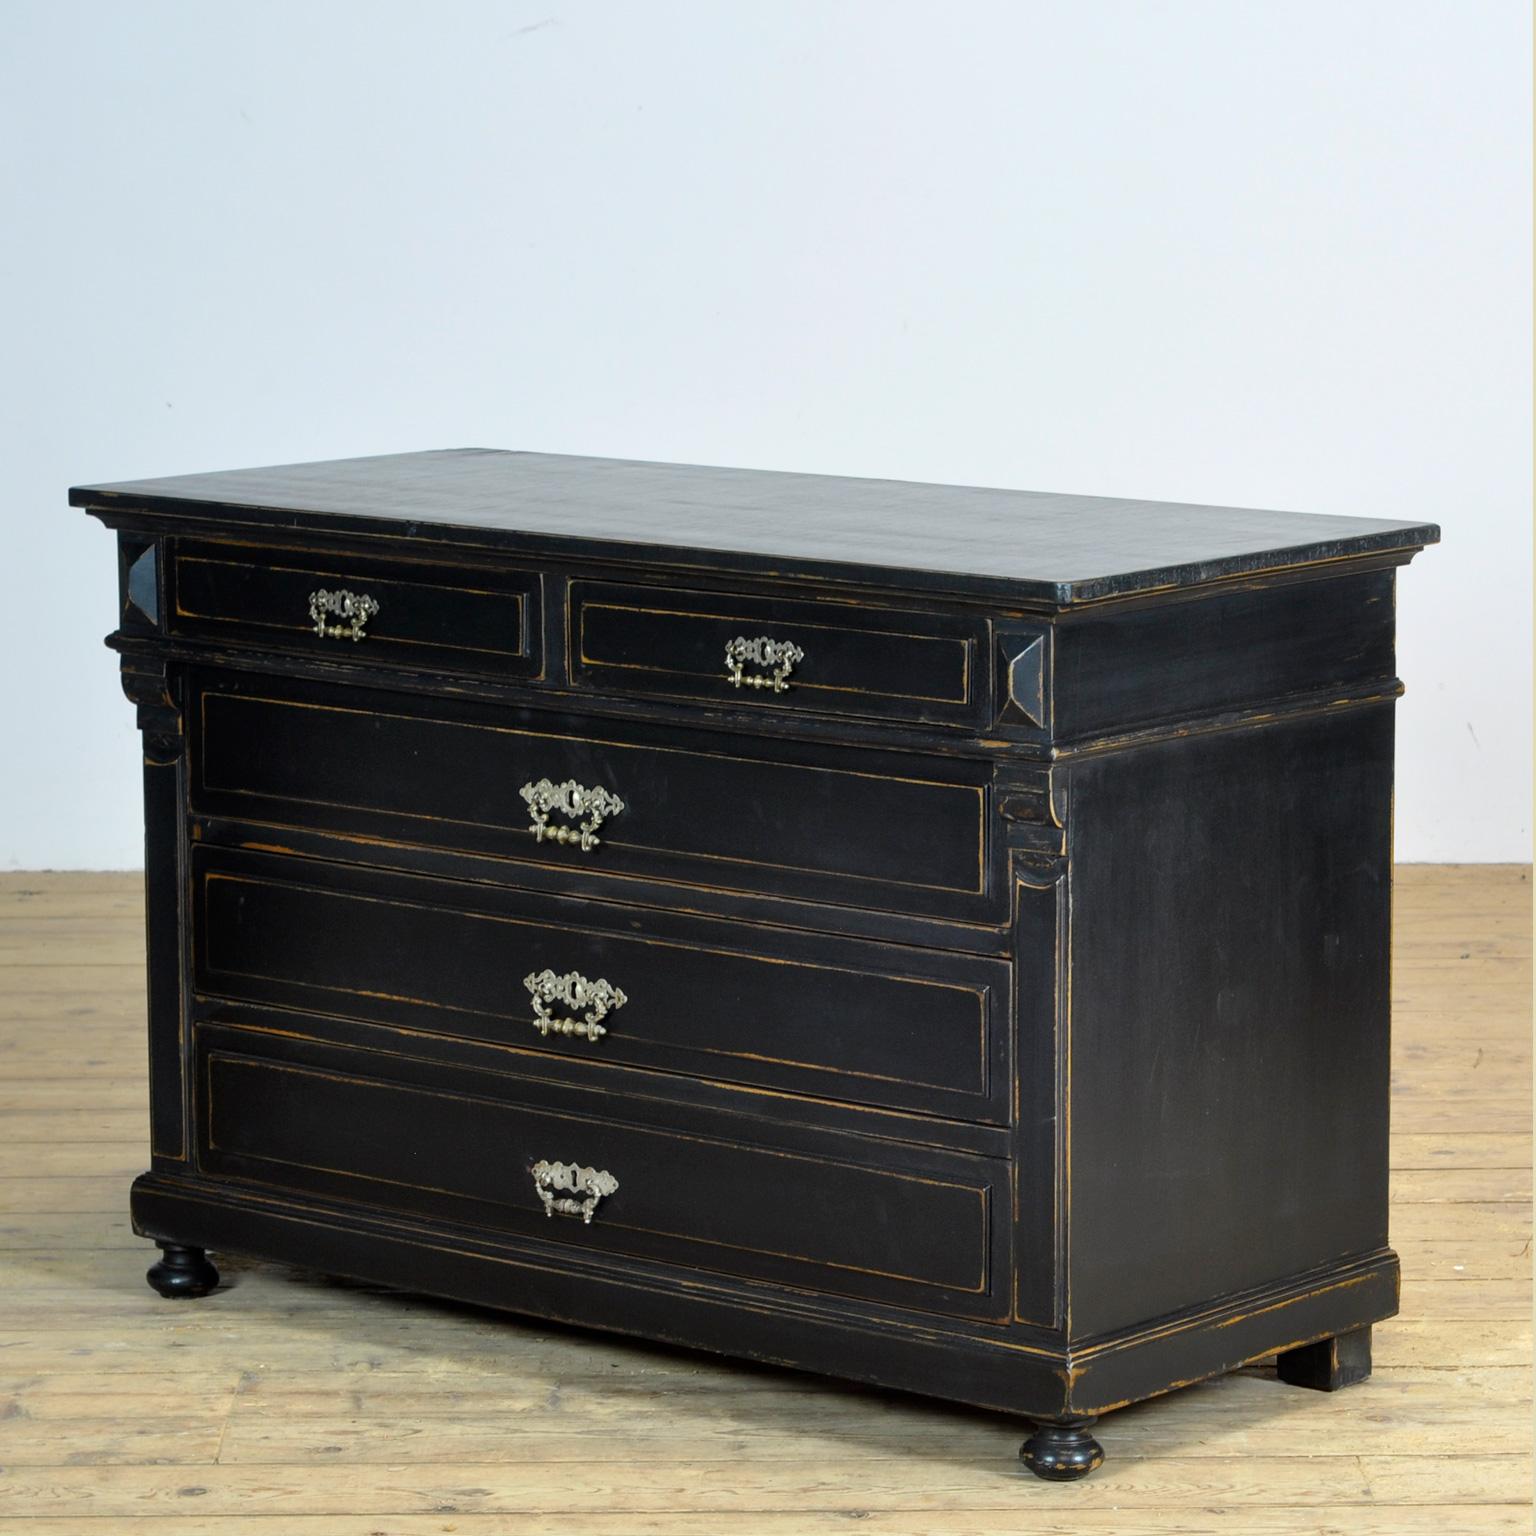 Hungarian Pine and Oak Chest of Drawers, circa 1920